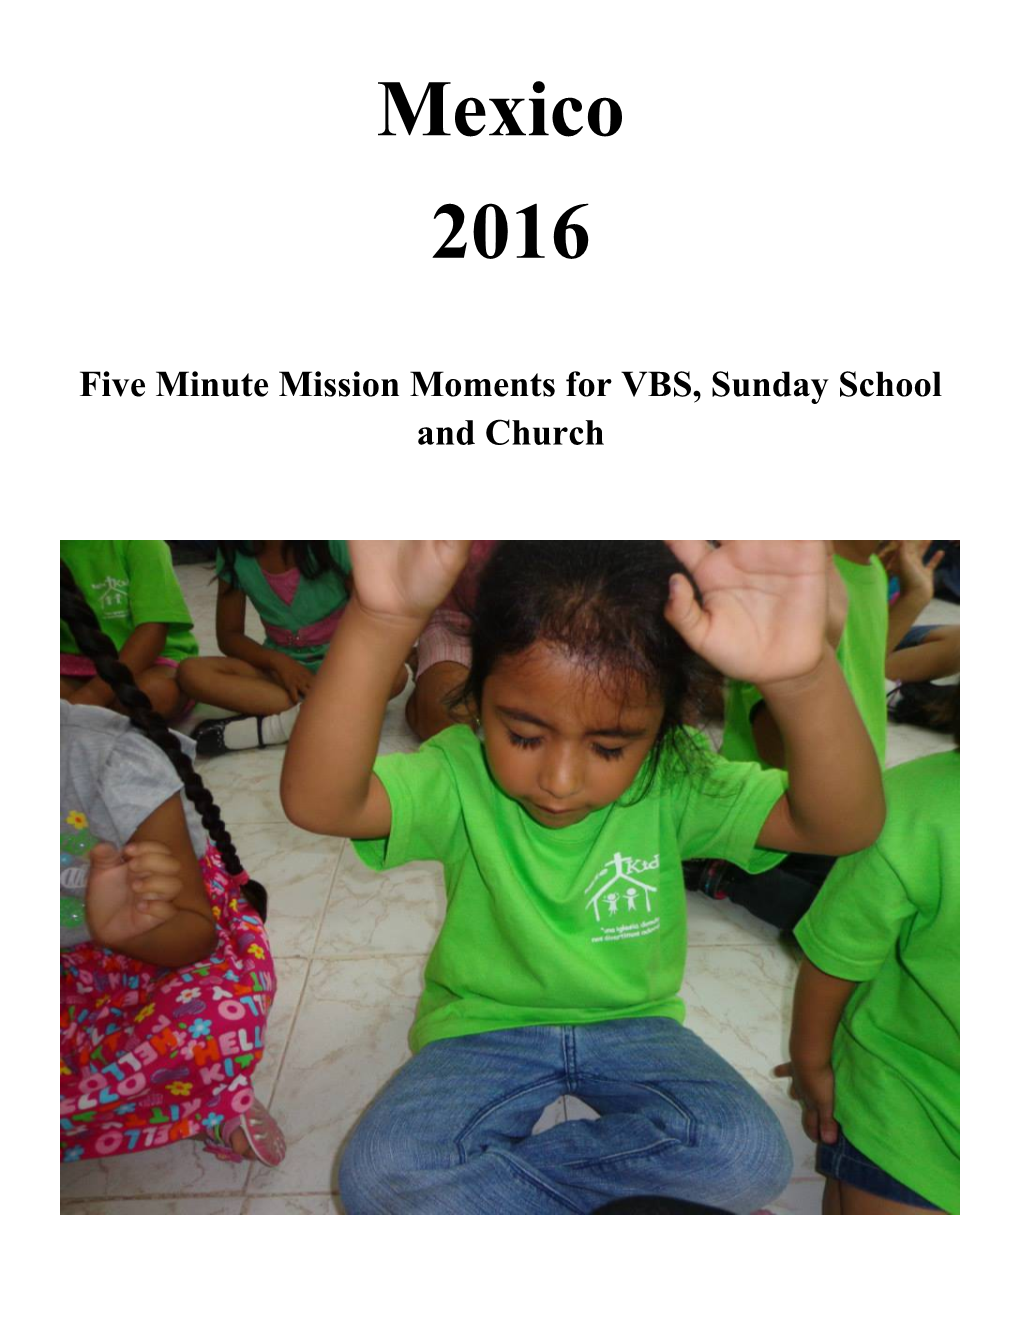 Five Minute Mission Moments for VBS, Sunday School and Church